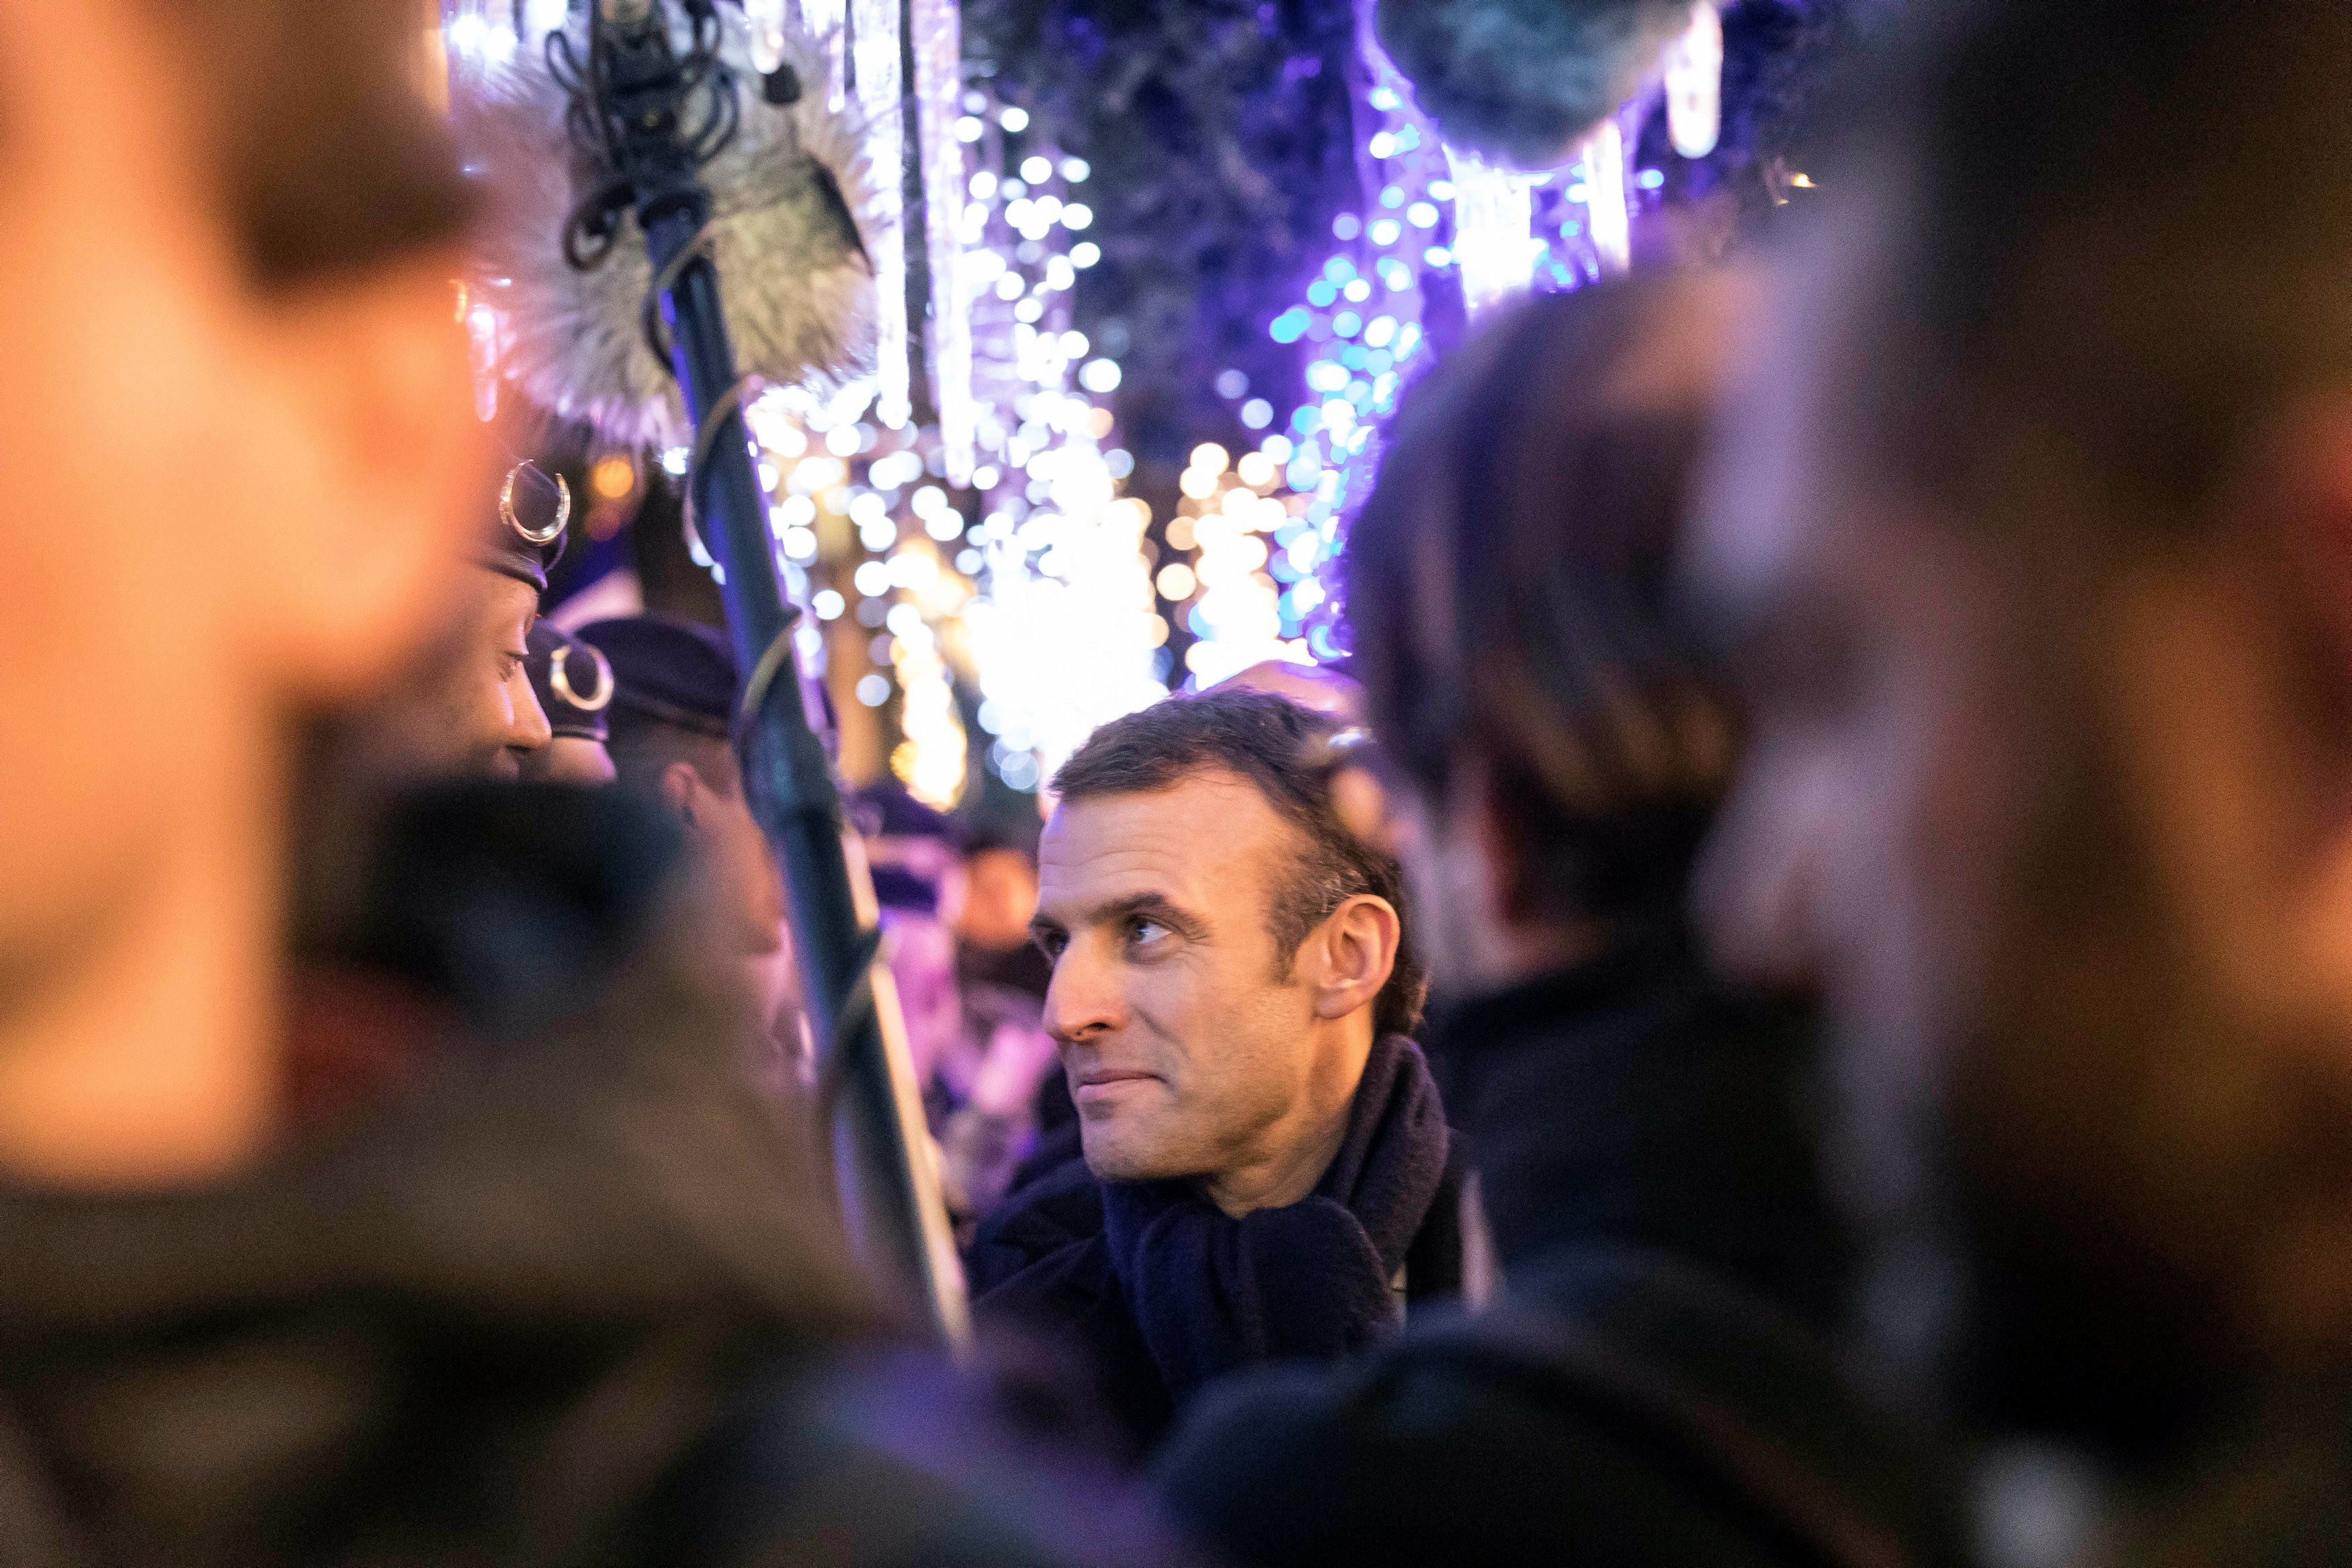 2018-12-14T201256Z_1737279034_RC16324A8BF0_RTRMADP_3_FRANCE-SECURITY-MACRON-CHRISTMAS